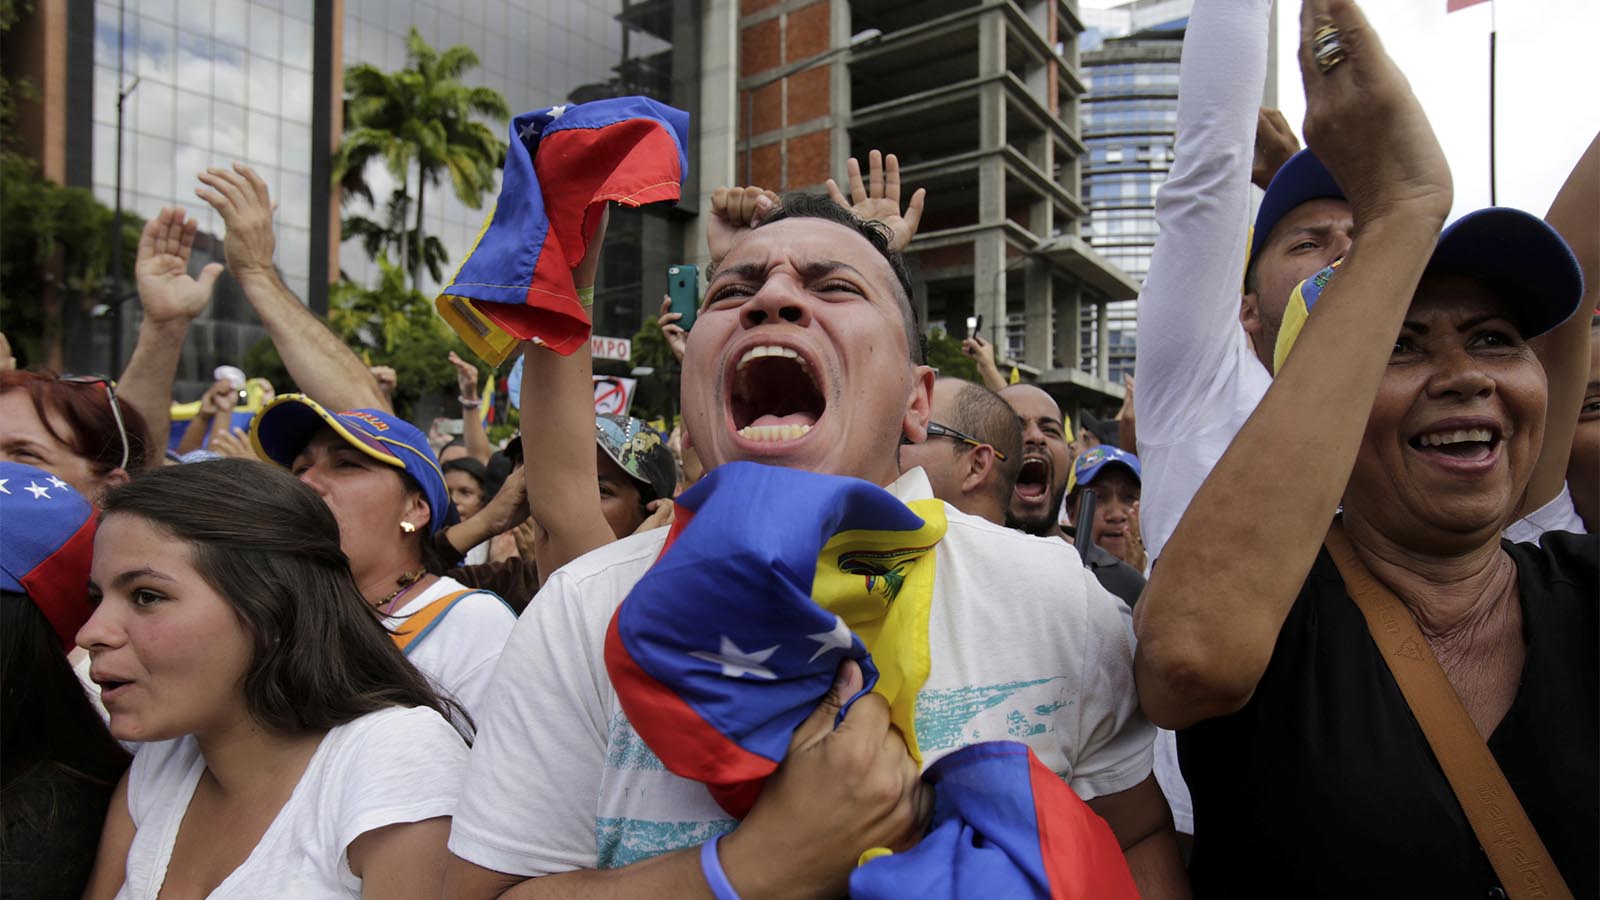 Anti-government protesters cheer as Juan Guaido, head of Venezuela's opposition-run congress, declares himself interim president of the South American country until a new election can be called, at a rally demanding the resignation of President Nicolas Maduro in Caracas, Venezuela, Wednesday, Jan. 23, 2019. (AP Photo/Boris Vergara)